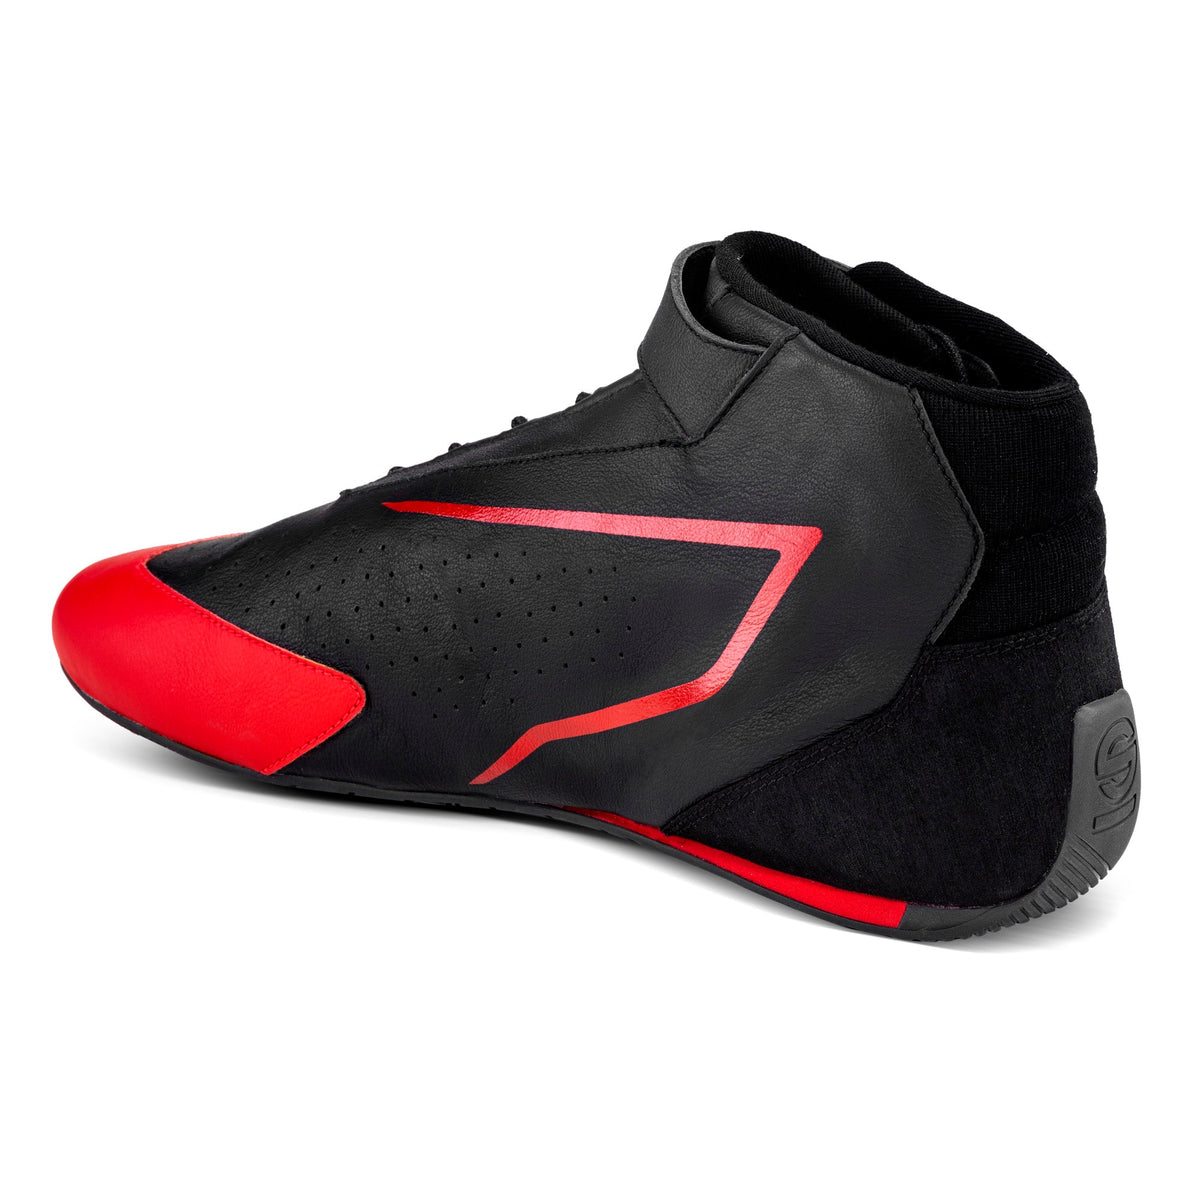 Sparco Skid Racing Shoes